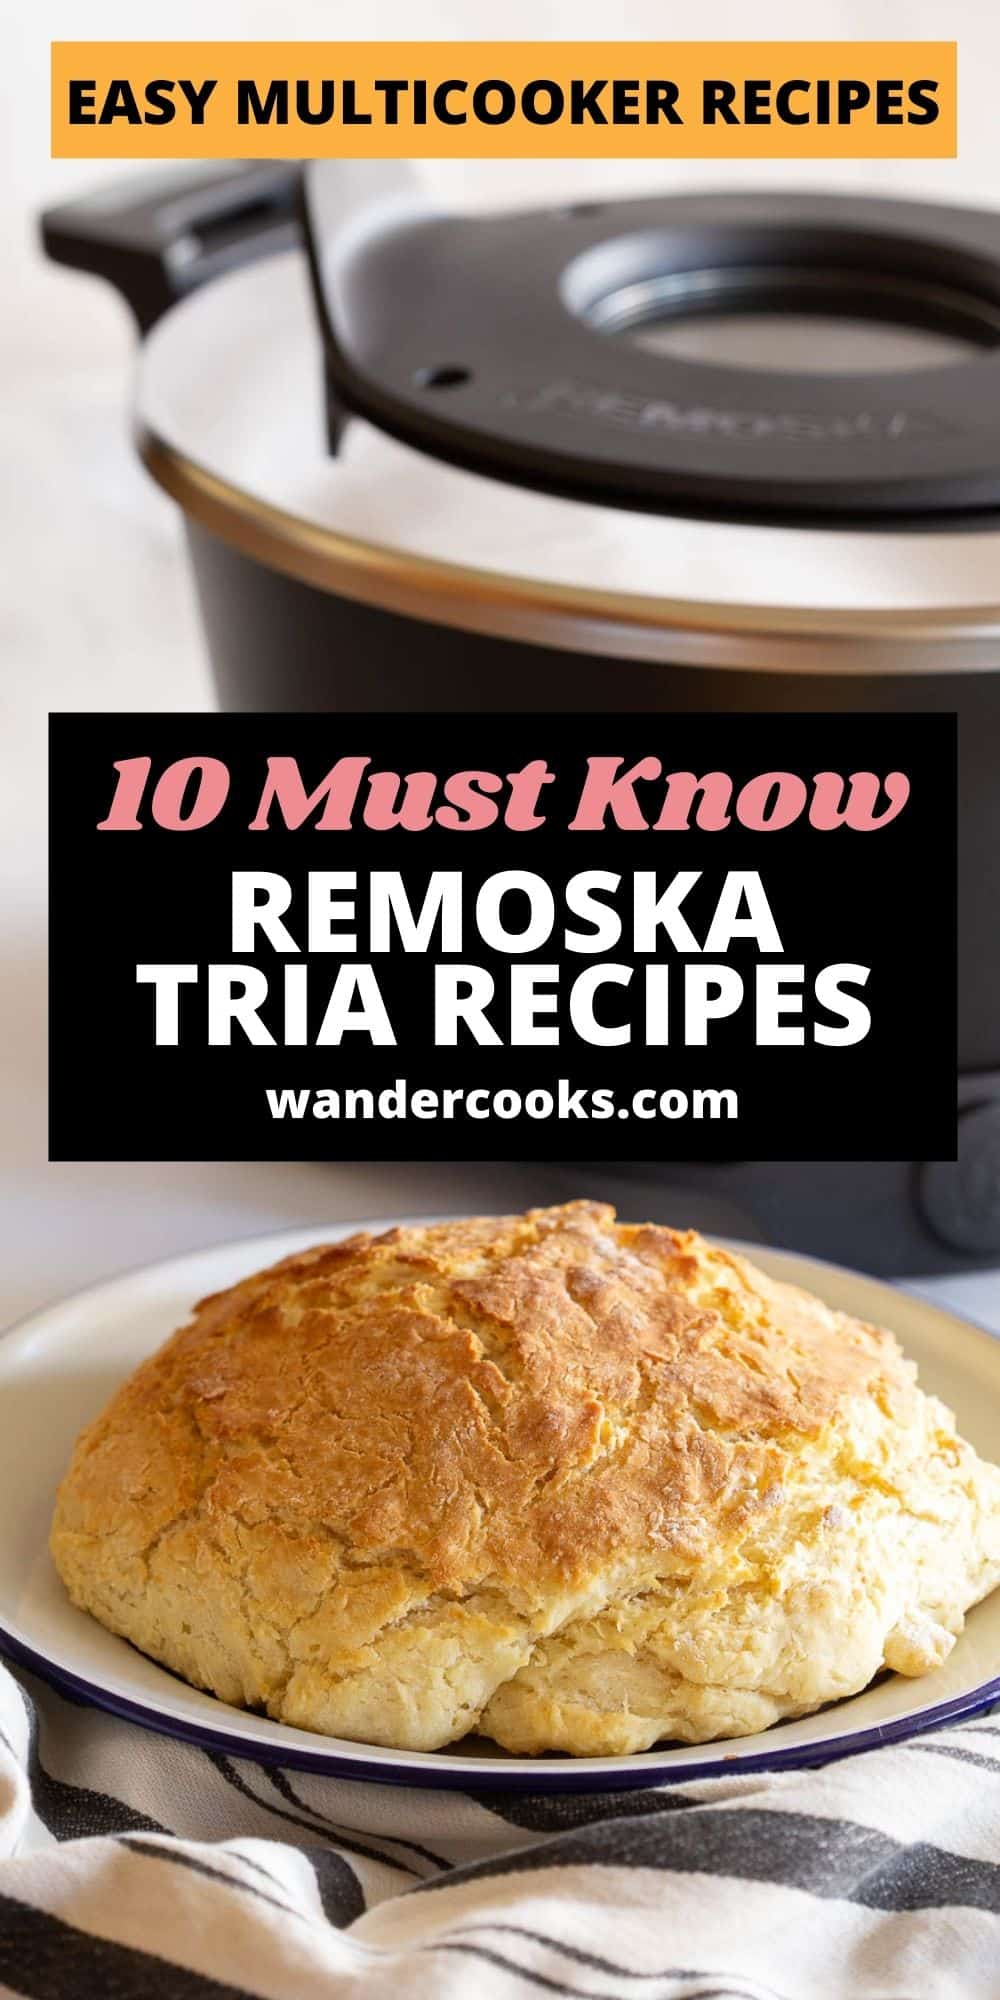 10 Must Know Recipes For the Remoska Tria Multi Cooker